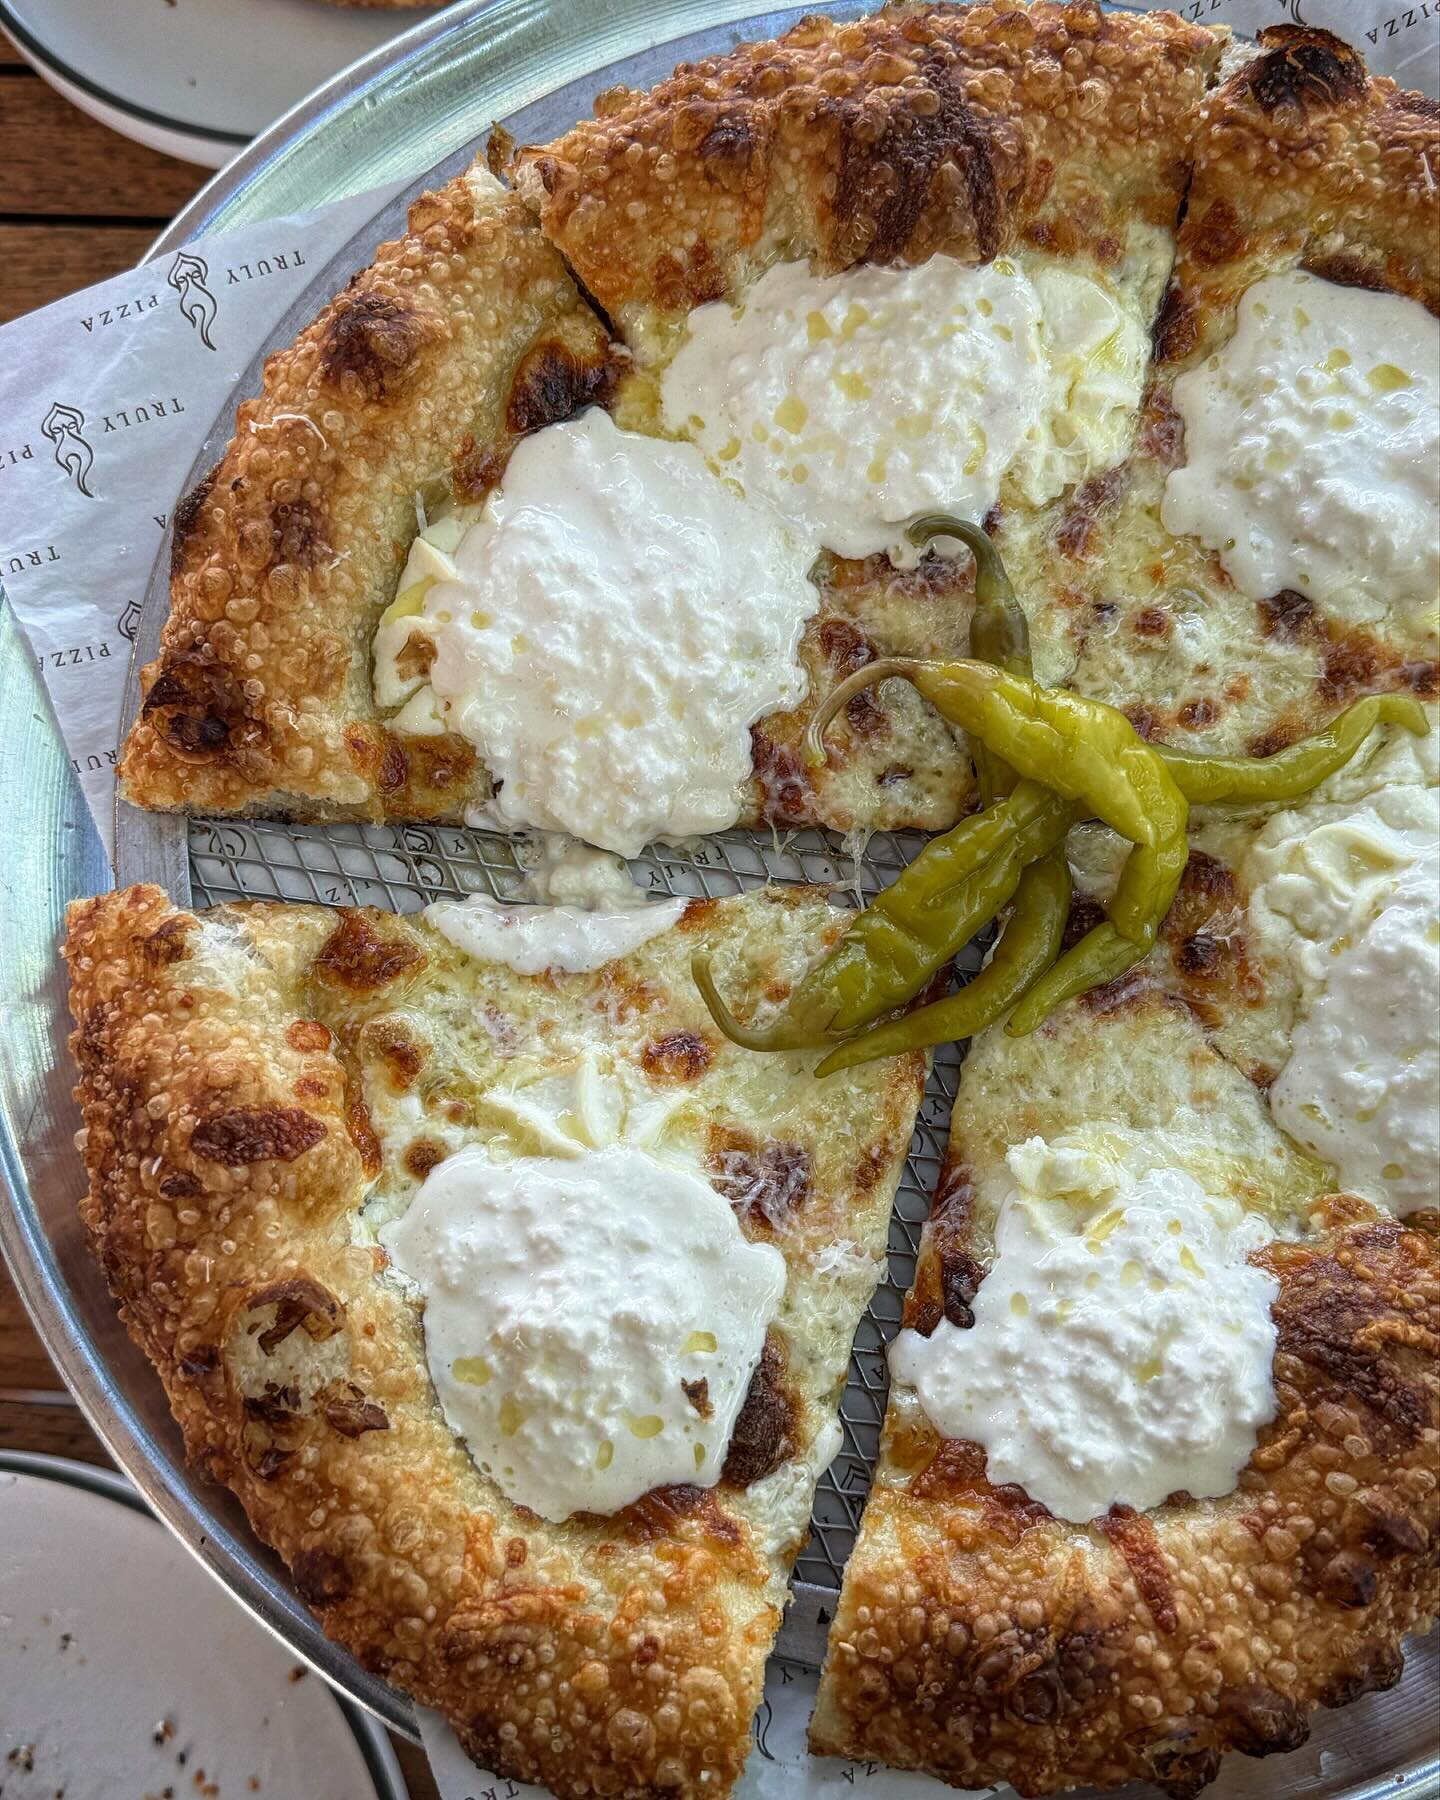 wowowow. I can&rsquo;t remember who in my pizza circle turned me on to truly pizza in SoCal&mdash;it&rsquo;s been on my radar for a minute&mdash;but pizzaiolo chris deckers @everythingbutanchovies stuff is truly fucking delicious (tfg?)&mdash;it&rsqu